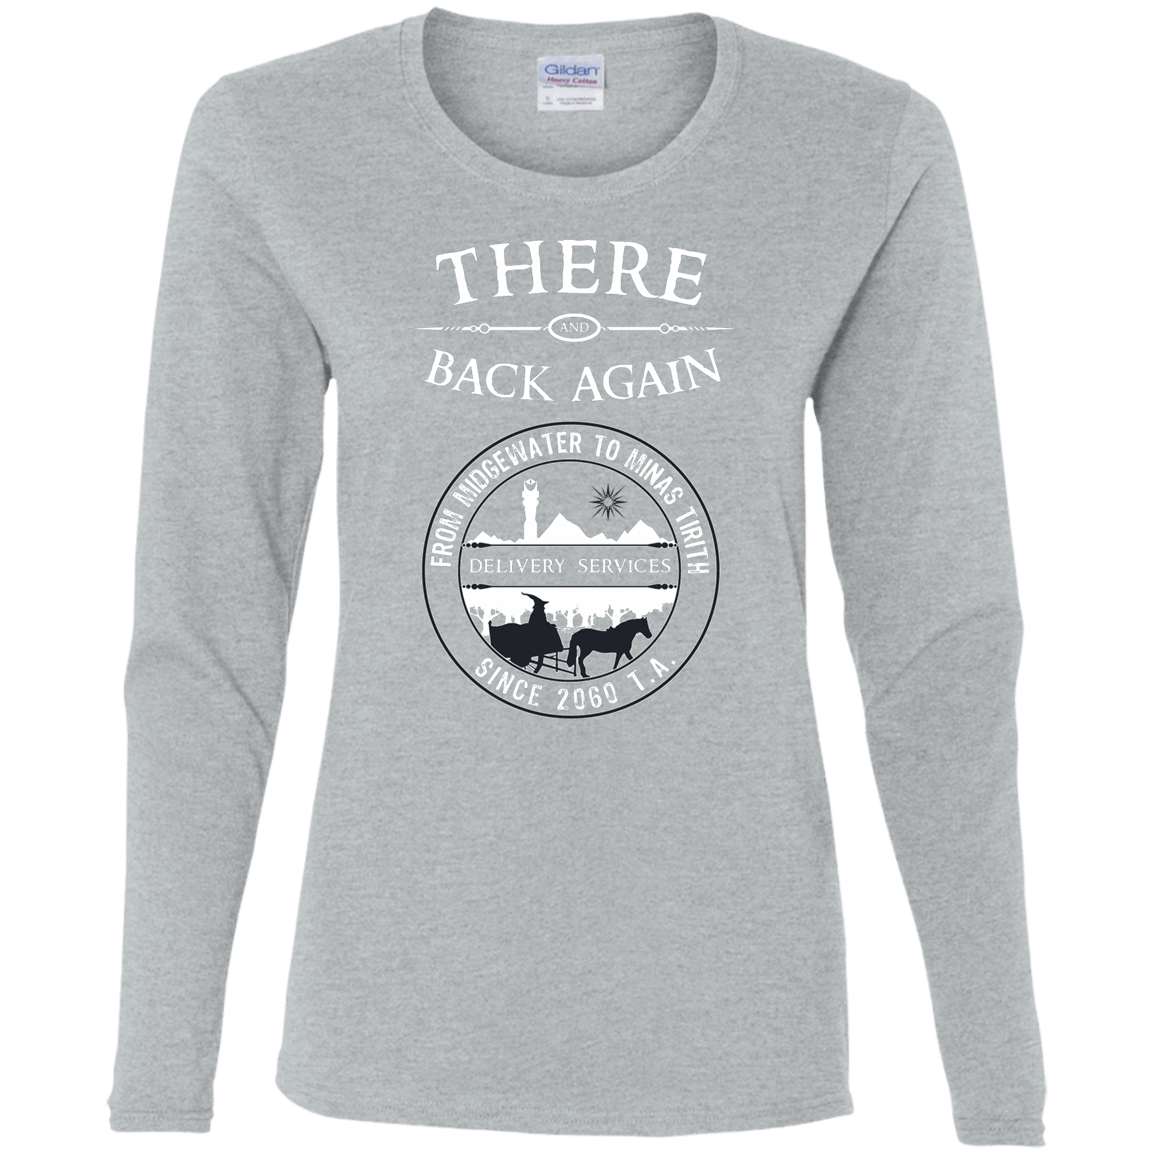 T-Shirts Sport Grey / S There and Back Again Women's Long Sleeve T-Shirt